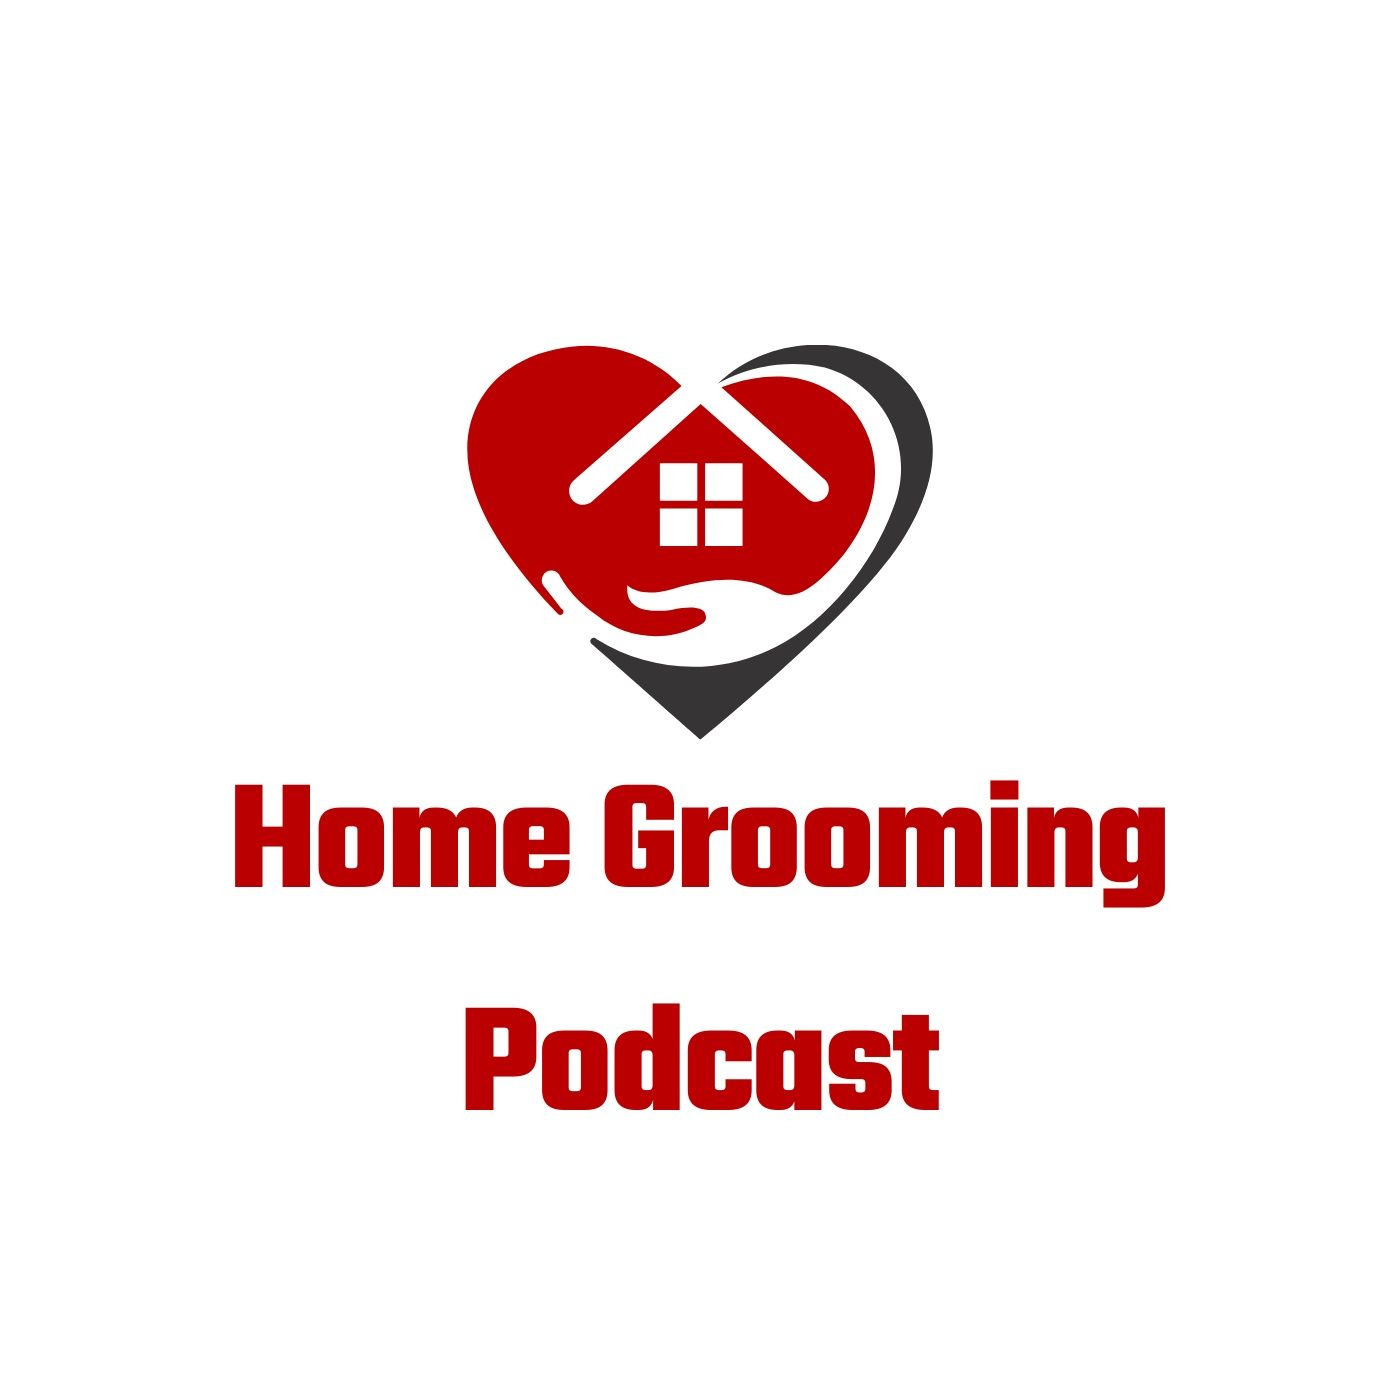 Home Grooming Podcast